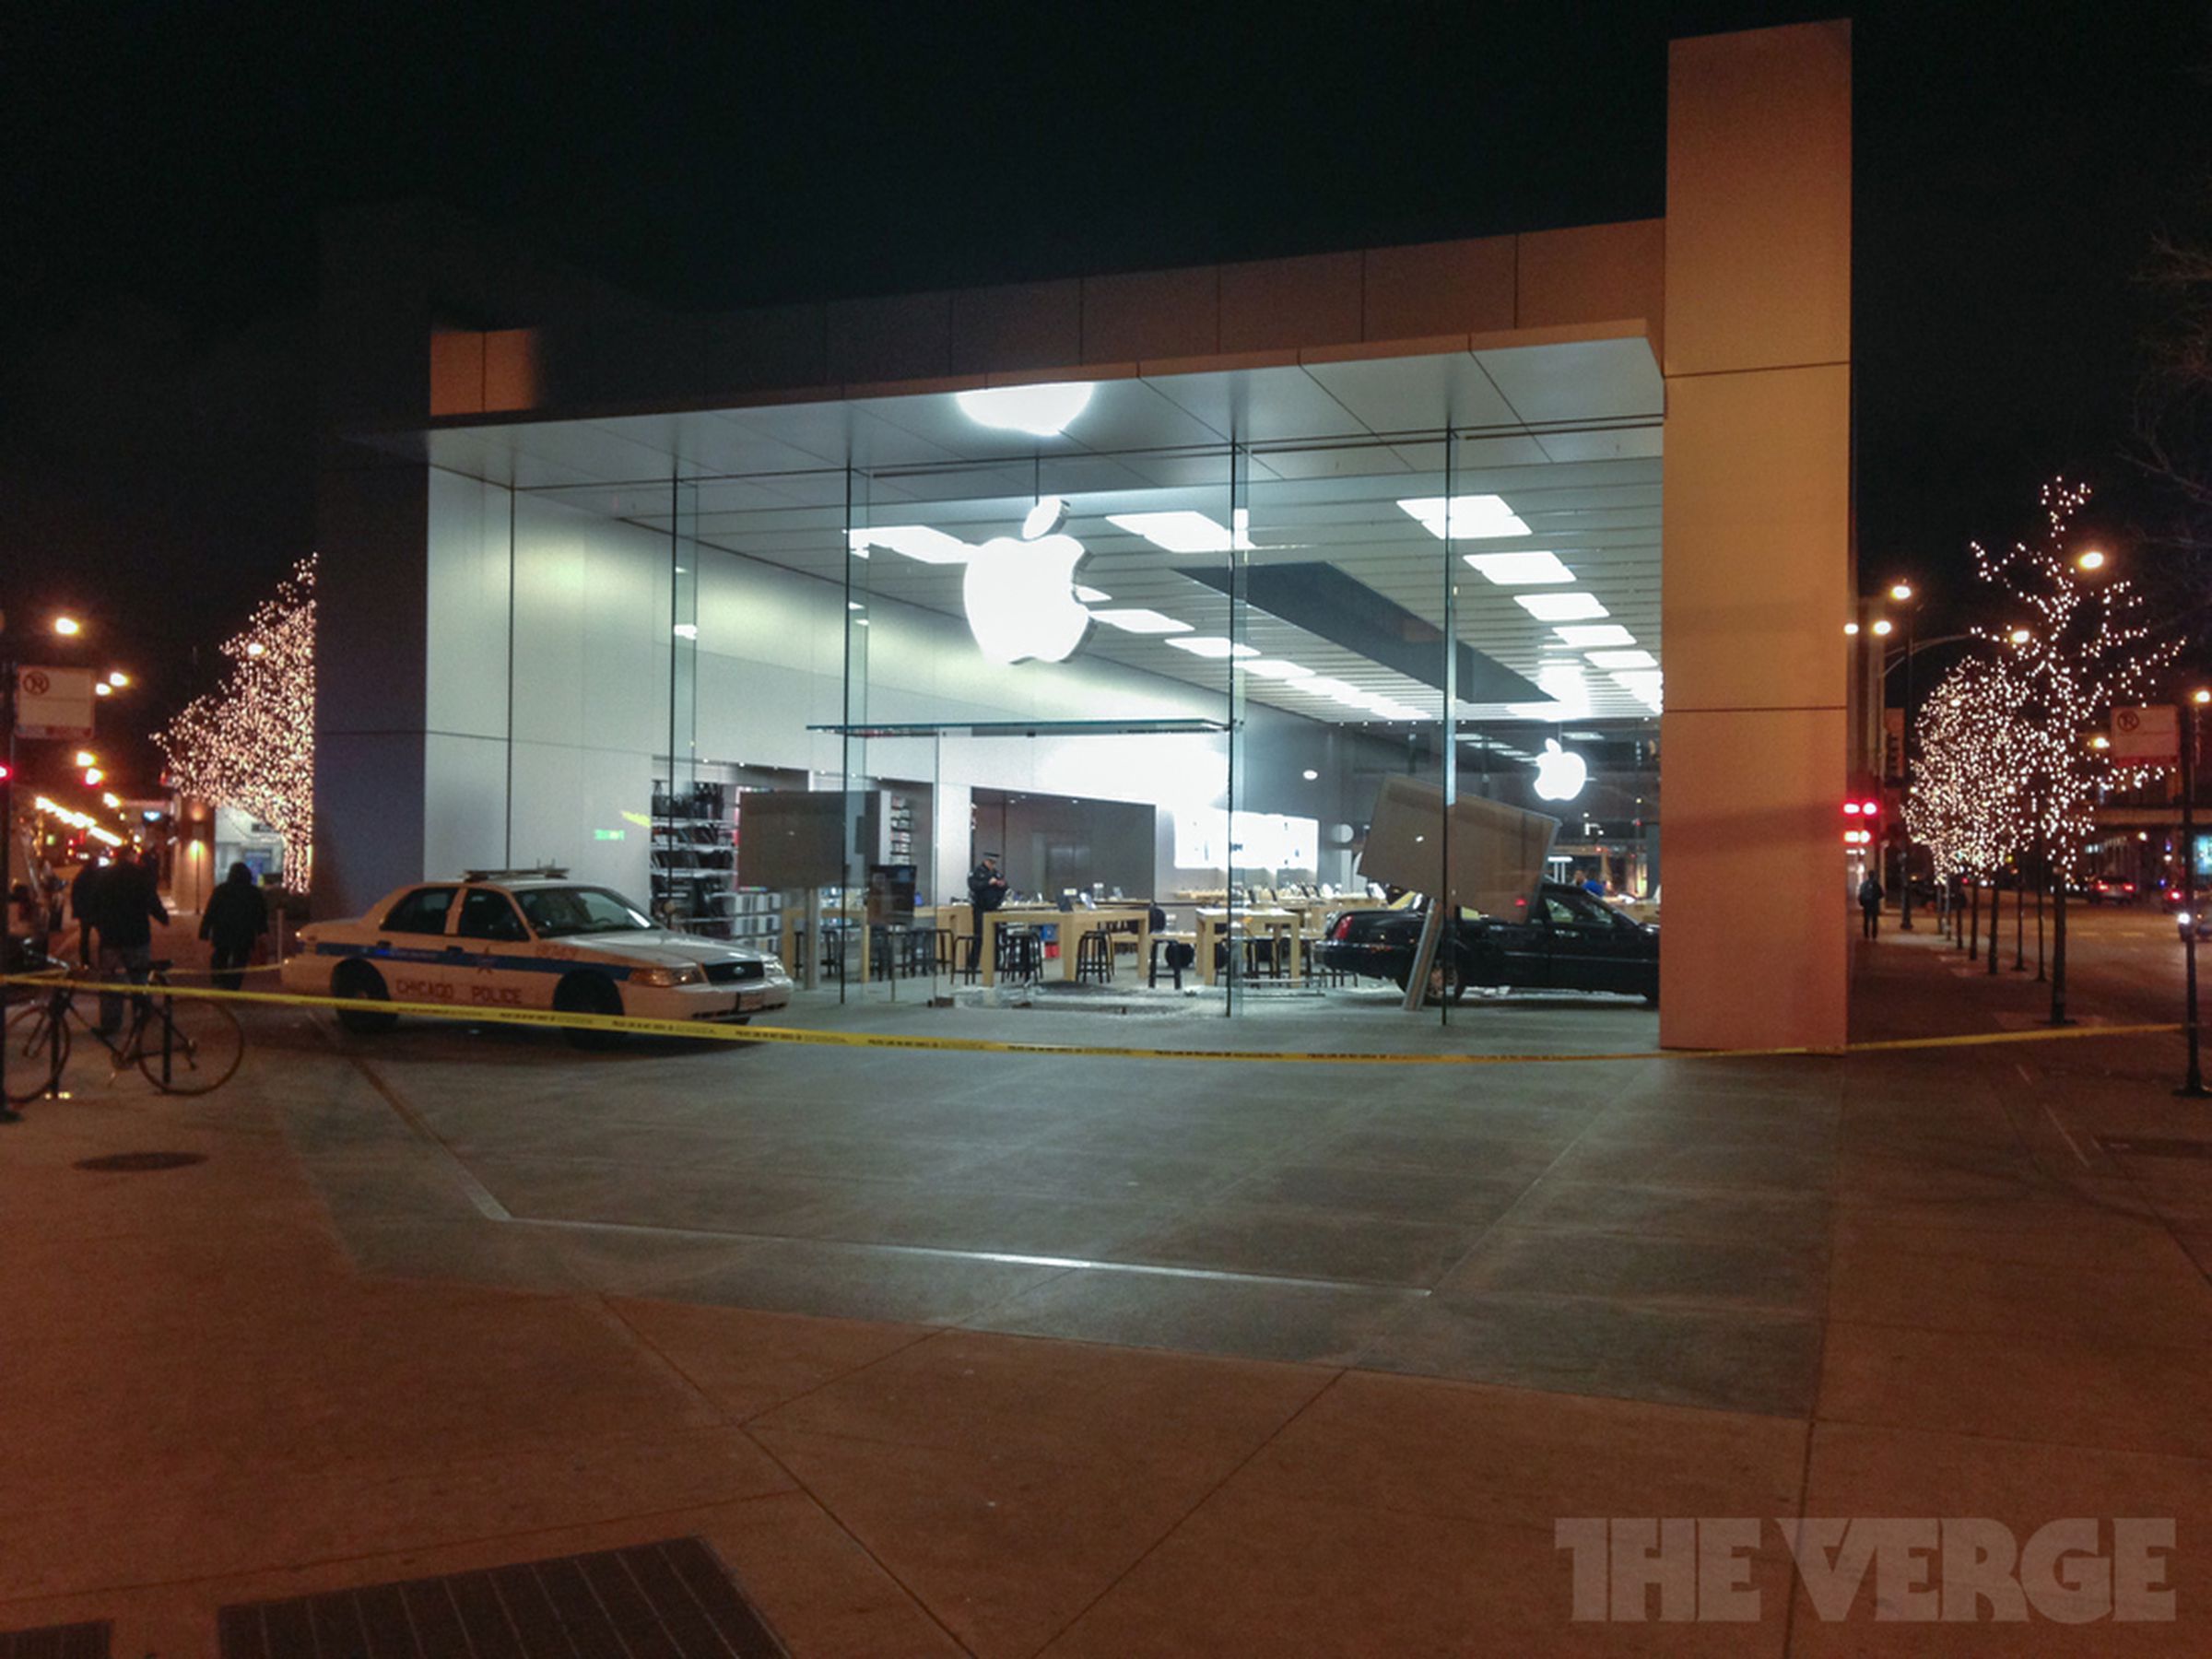 Car accident at Lincoln Park Apple Store (photos) 